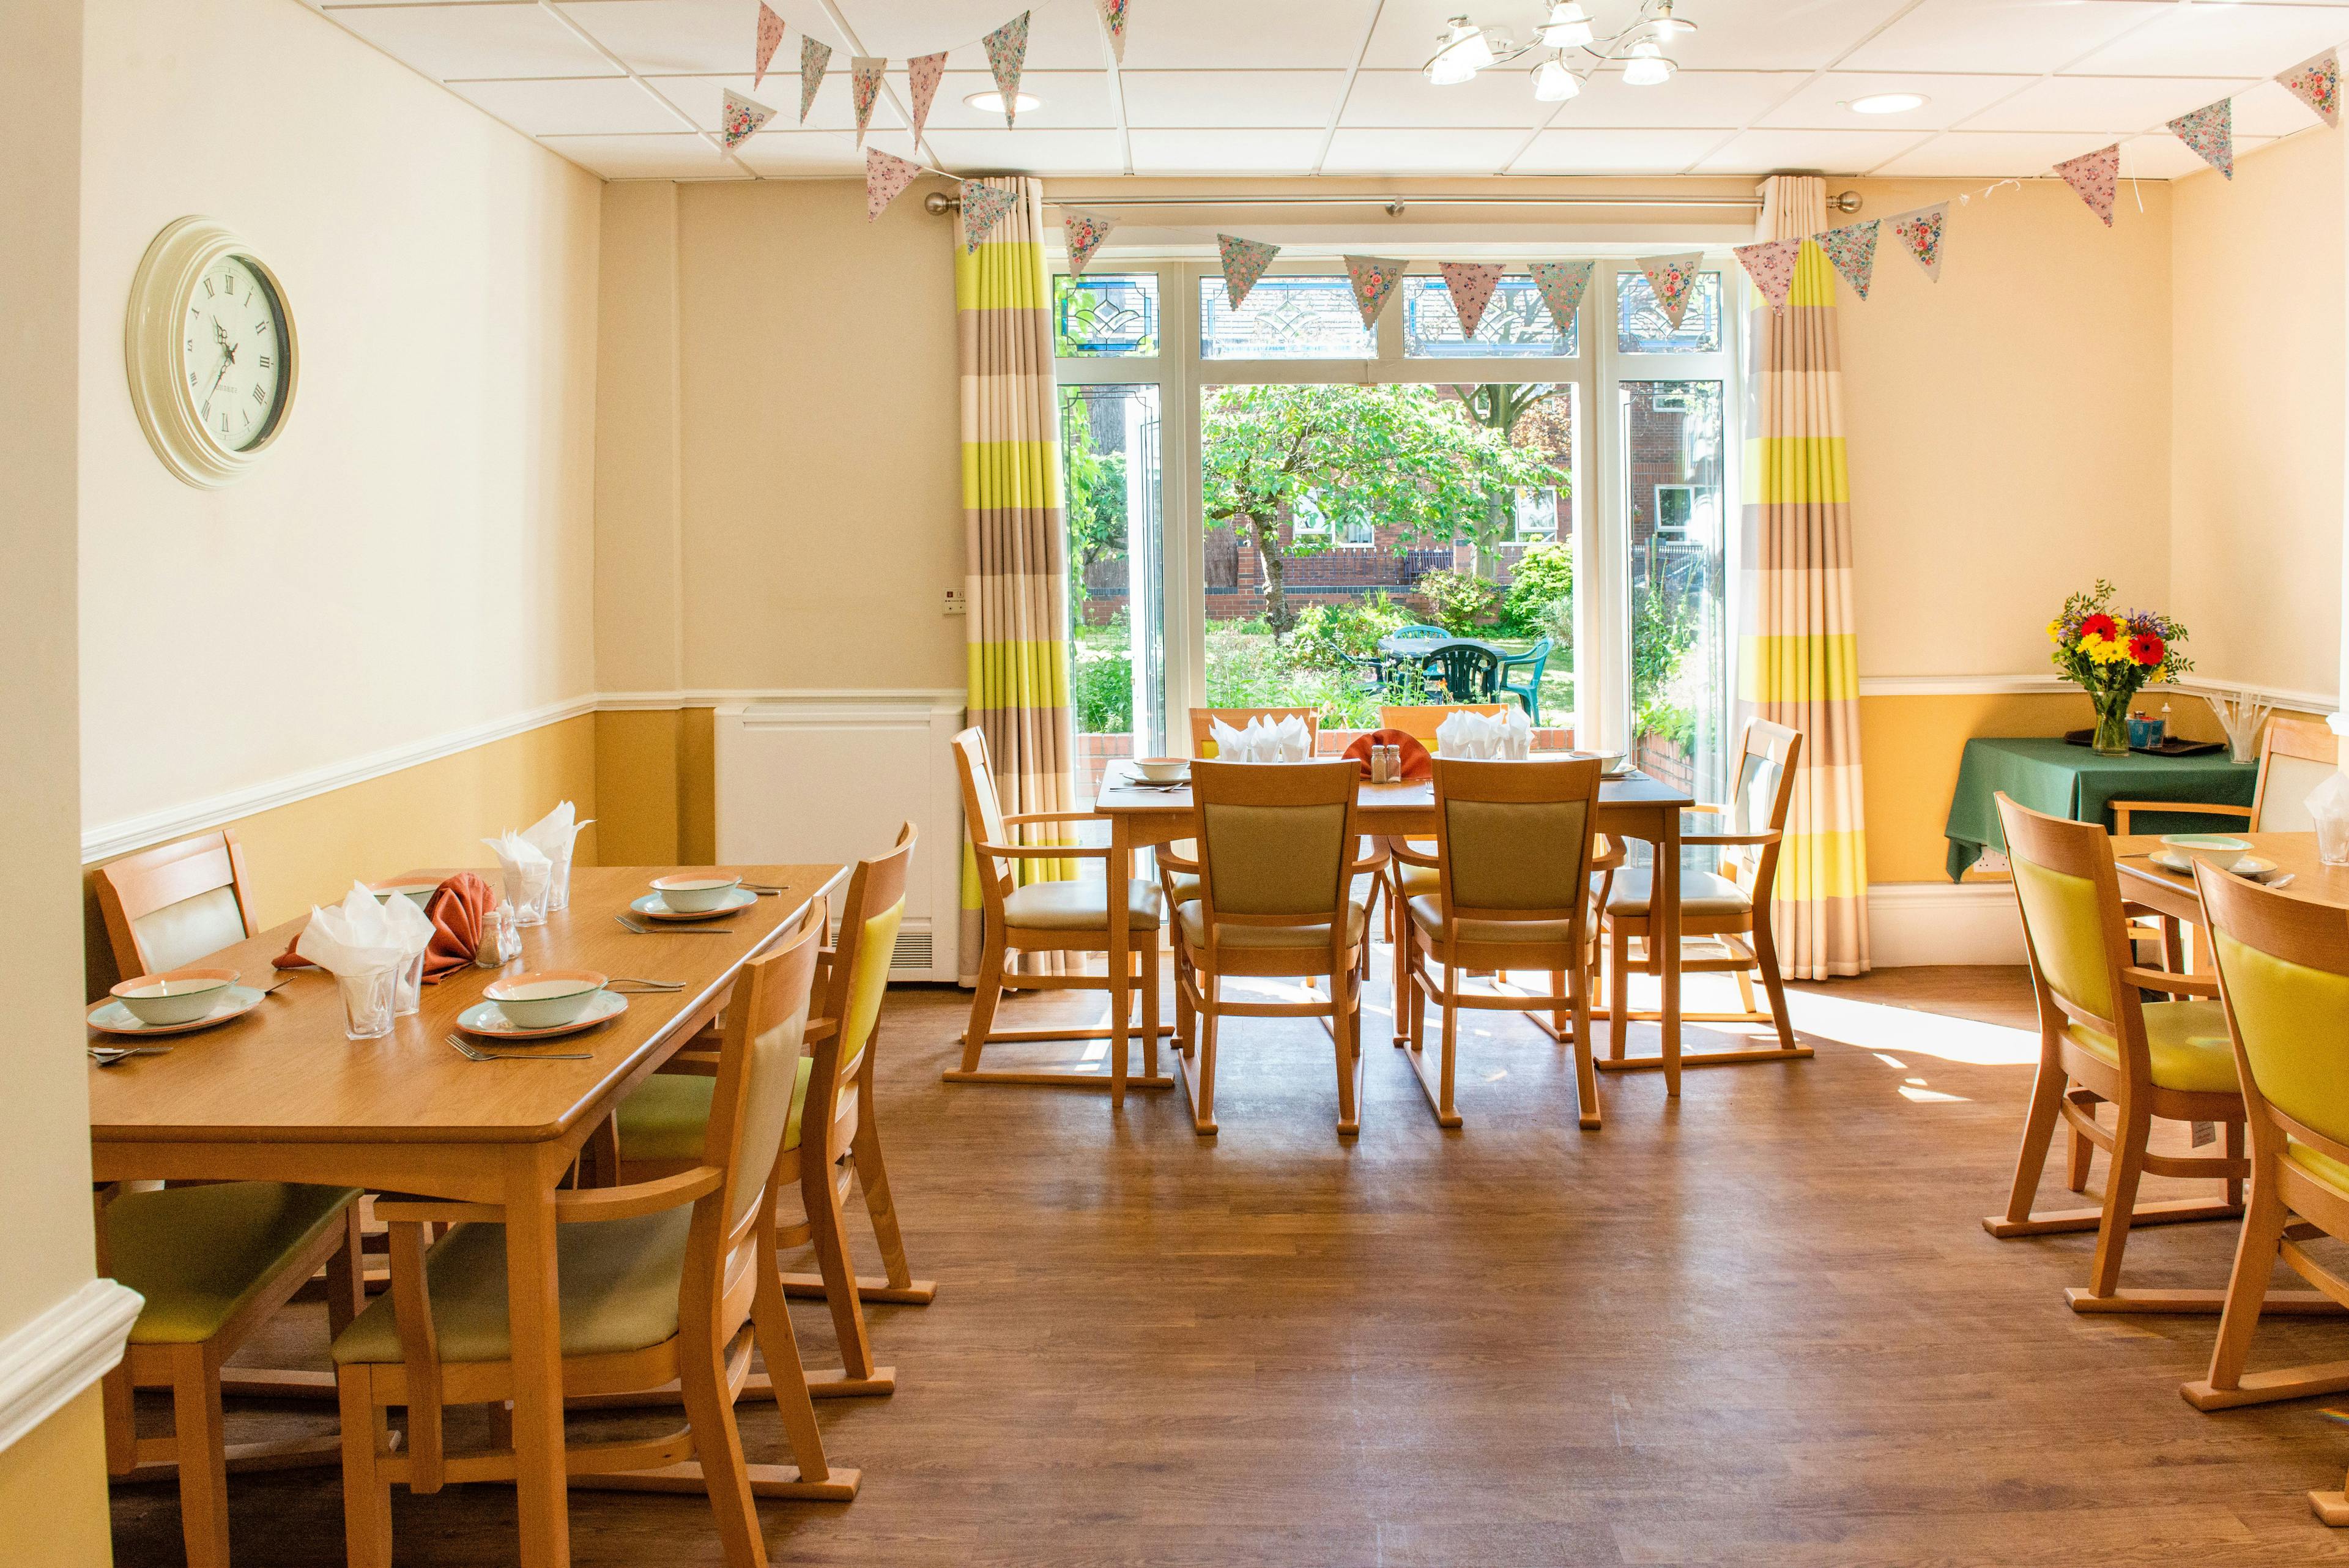 Ashmere Derbyshire - The Firs care home 002